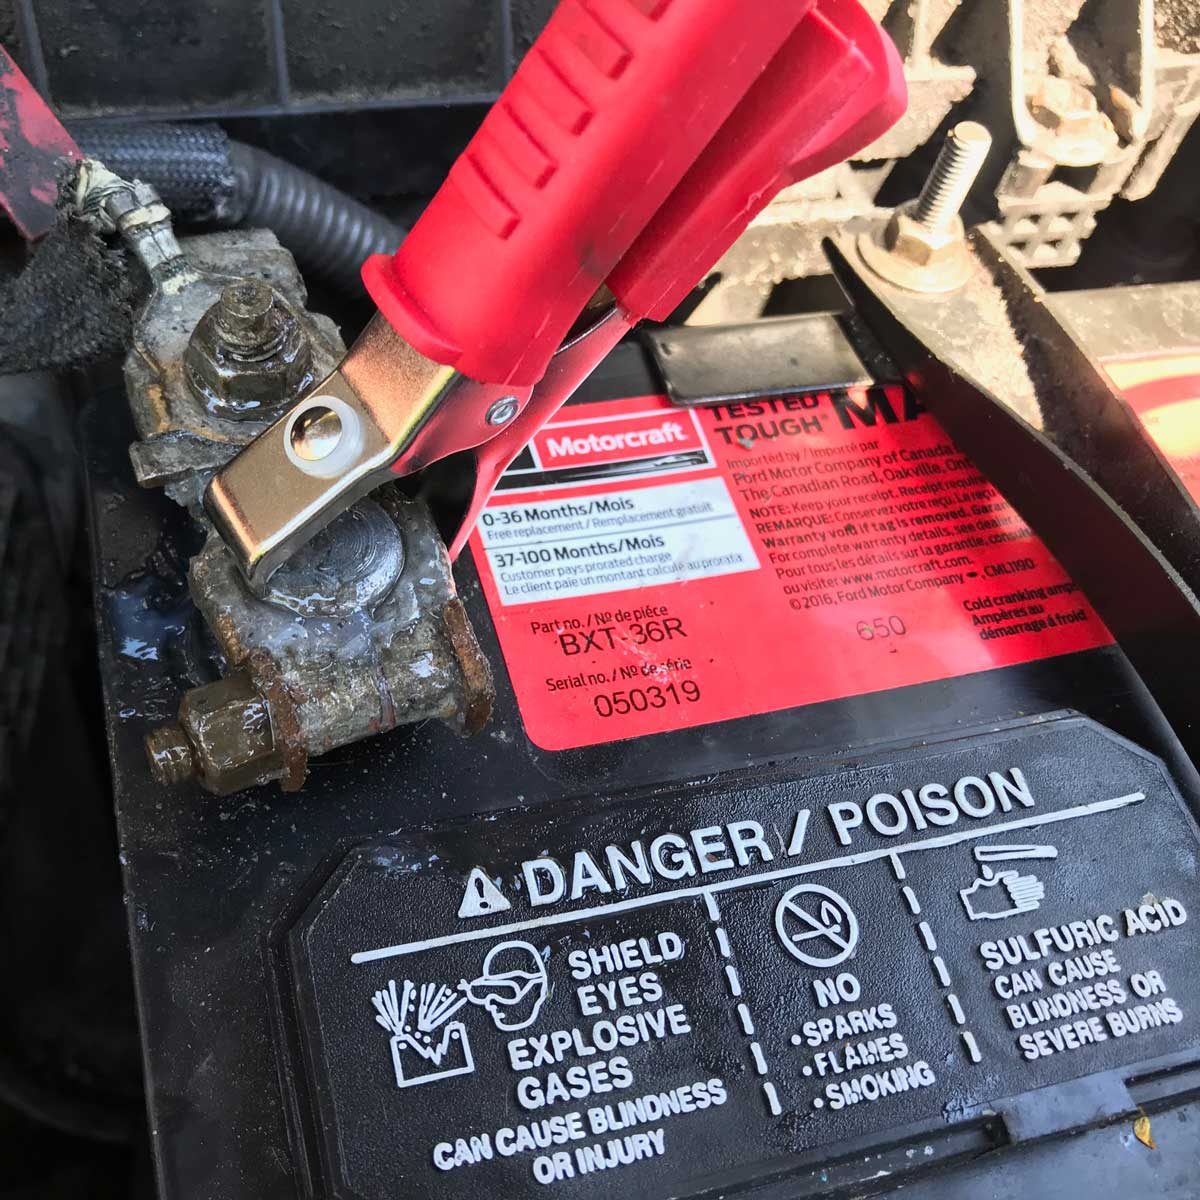 How to test a car battery: connect the tester